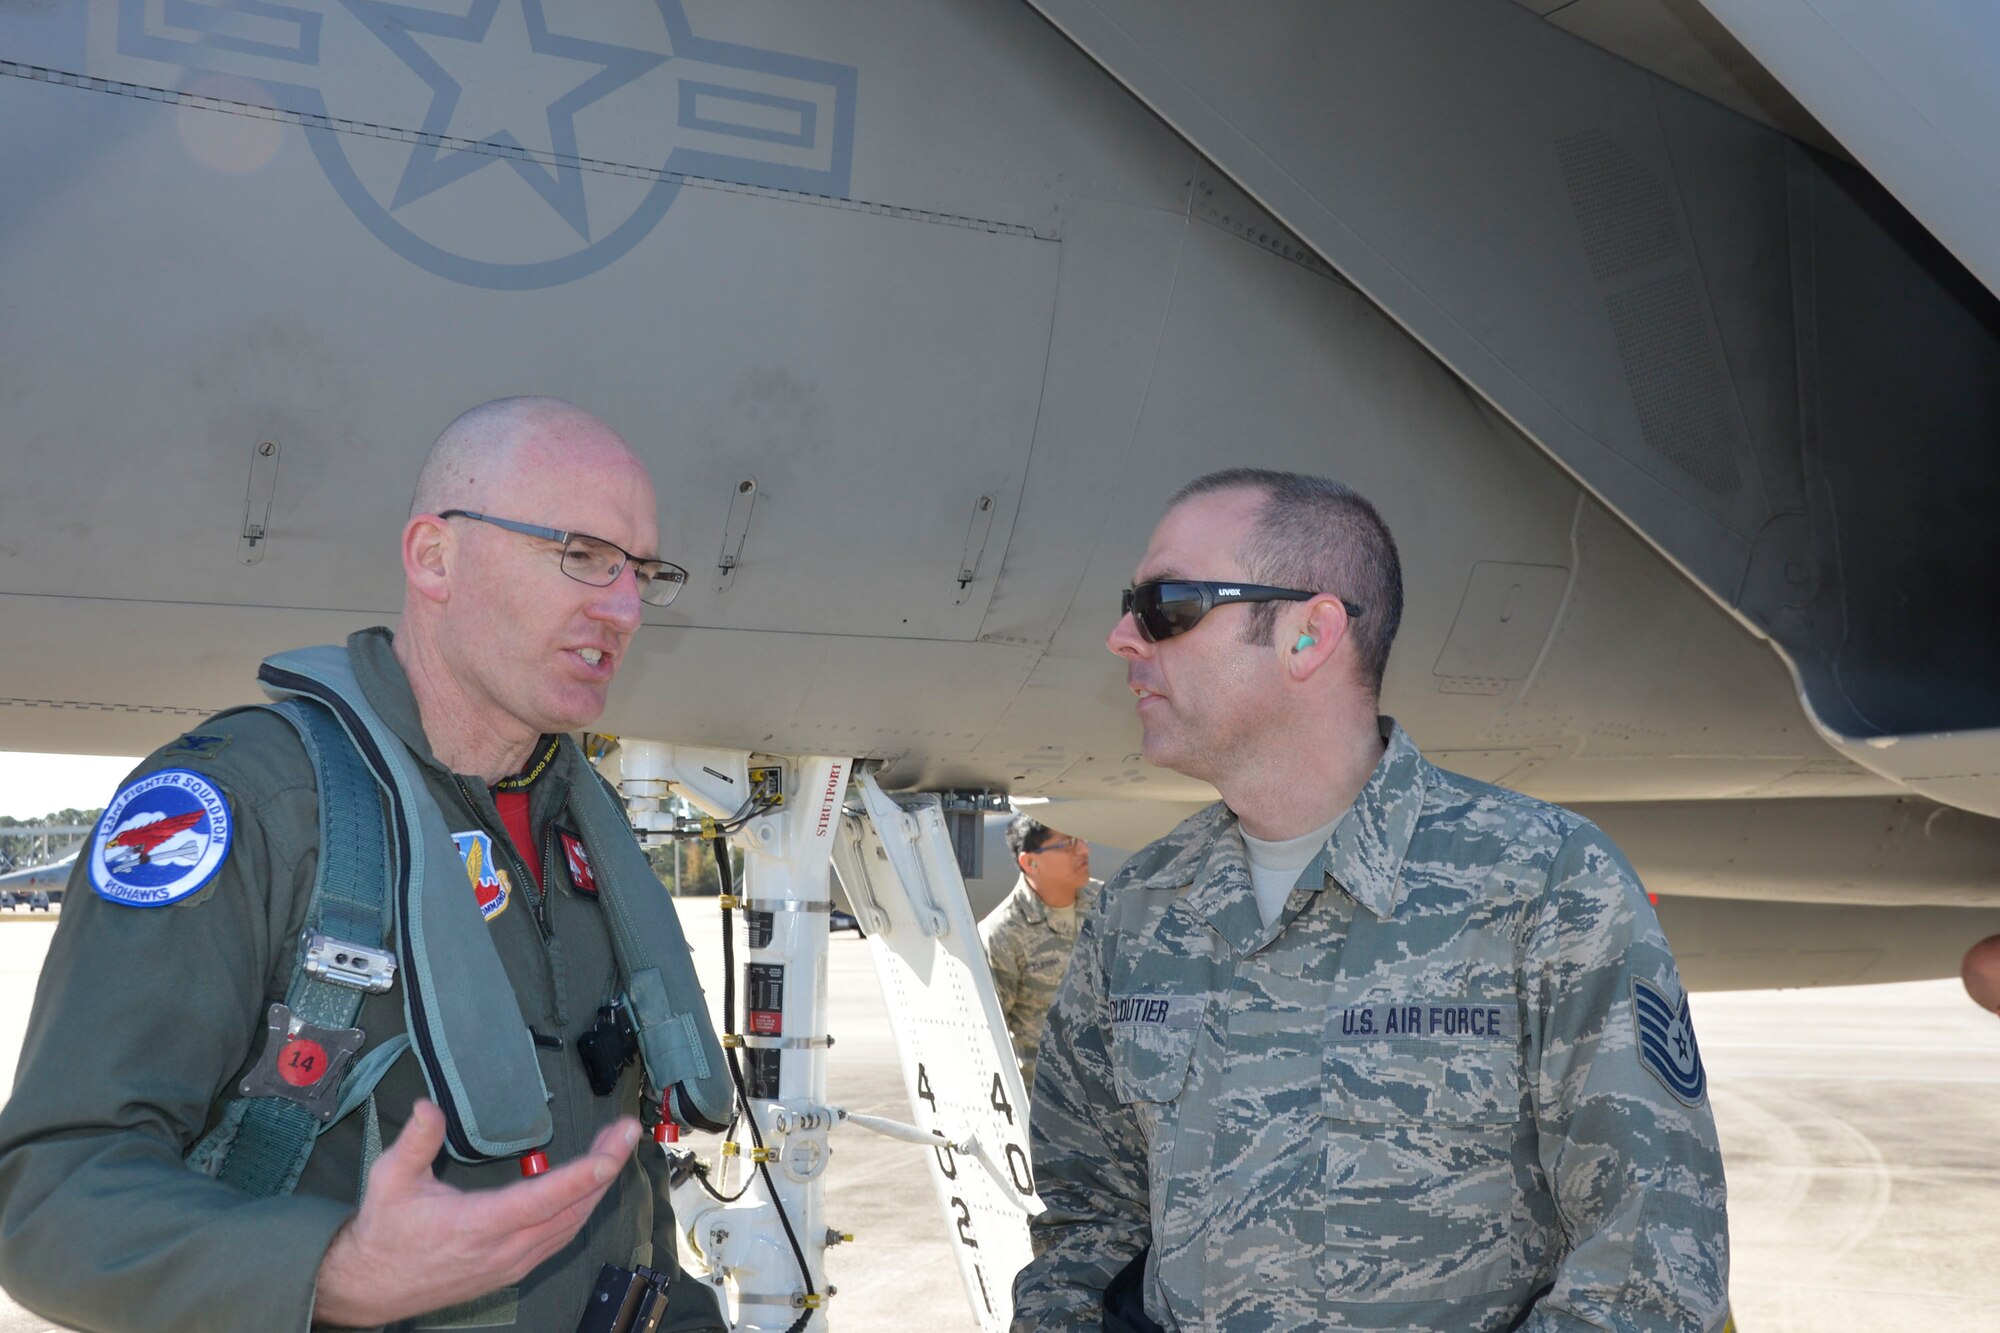 From the 142nd Fighter Wing, Portland, Oregon, Col. Paul Fitzgerald, wing commander and F-15 Eagle pilot, talks with Tech. Sgt. John Cloutier, F-15 crew chief, on the flightline at Tyndall Air Force Base, following a Combat Archer sortie Jan. 29. Combat Archer is a two-week weapon systems evaluation program where participants load, fly and shoot live missiles and subsequently evaluate the entire process to validate whether the weapon performs according to established specifications. (Air Force Photo Released/Mary McHale)